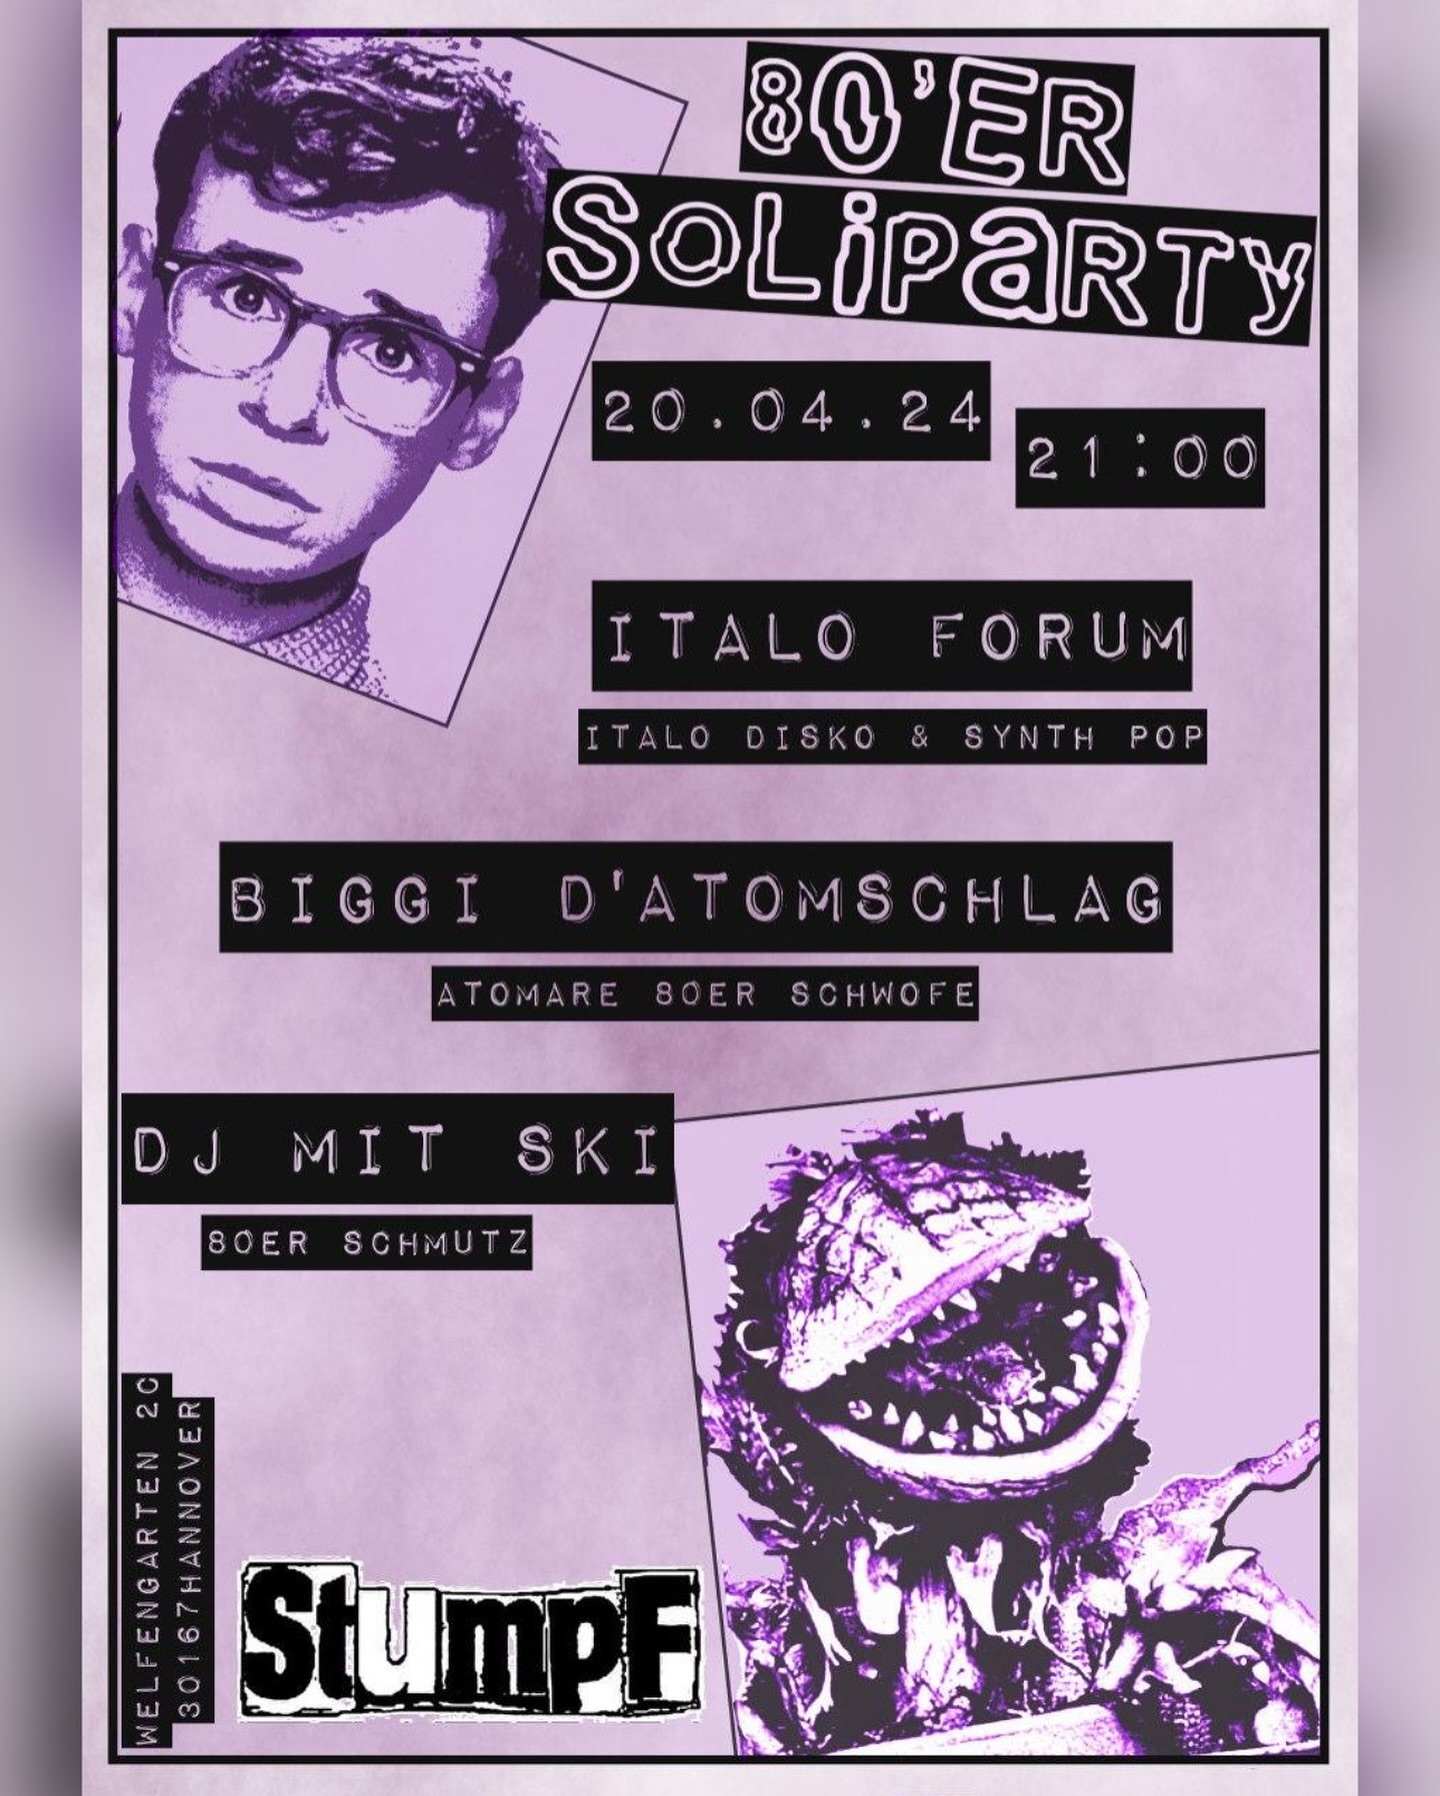 80er Soliparty @Stumpf